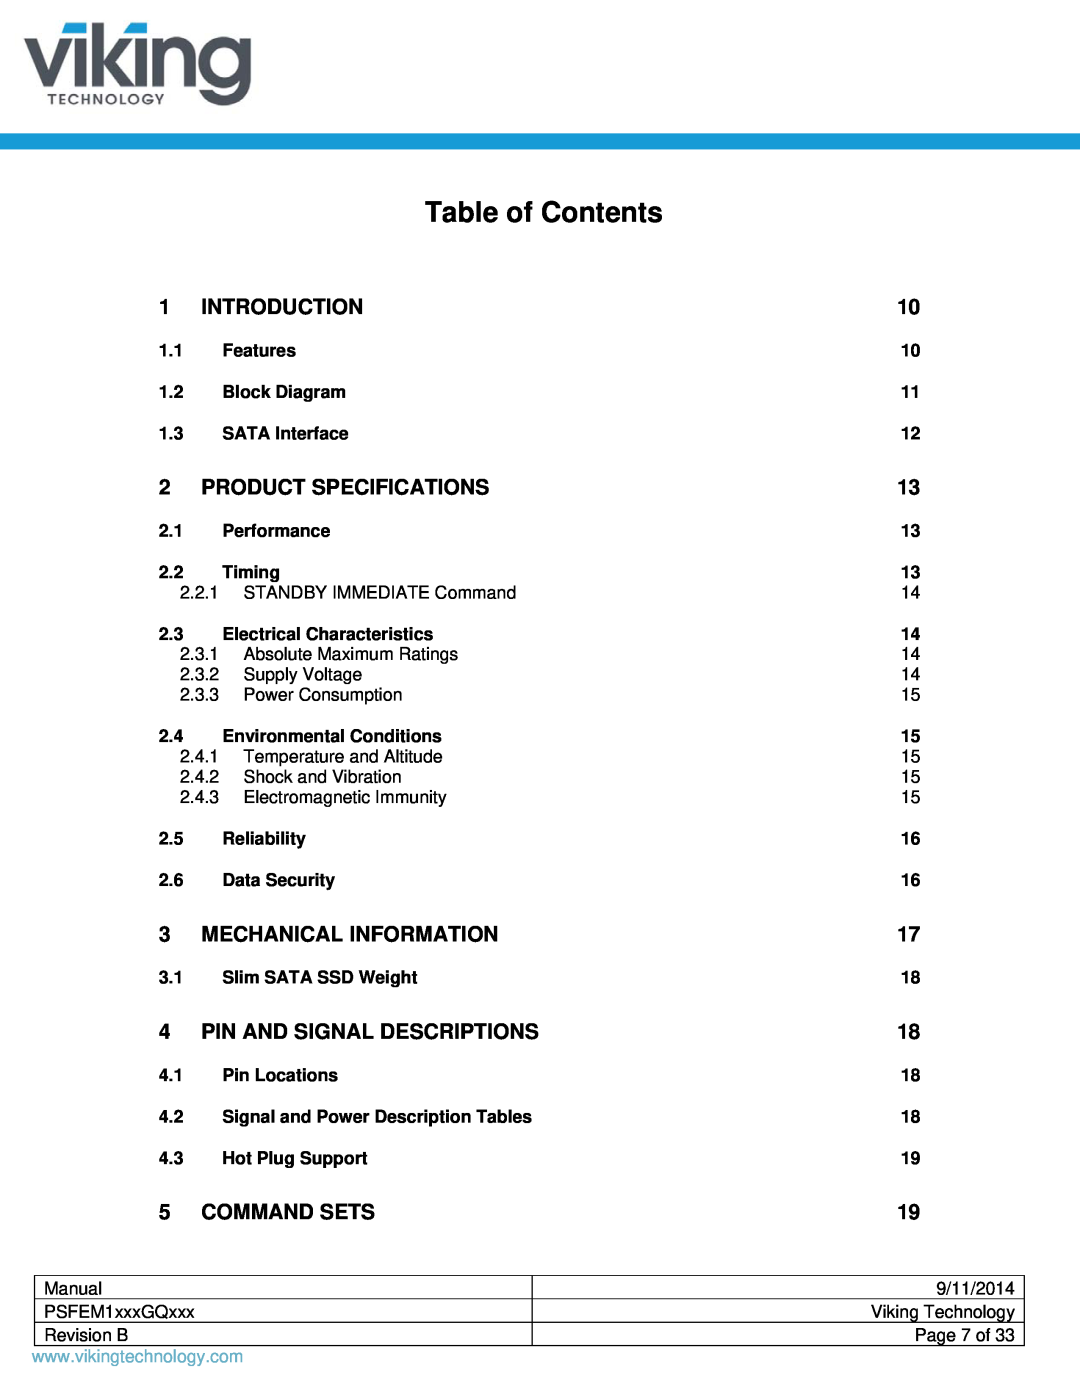 Viking PSFEM1xxxGQxxx manual Table of Contents, Introduction, Product Specifications, Mechanical Information, Command Sets 